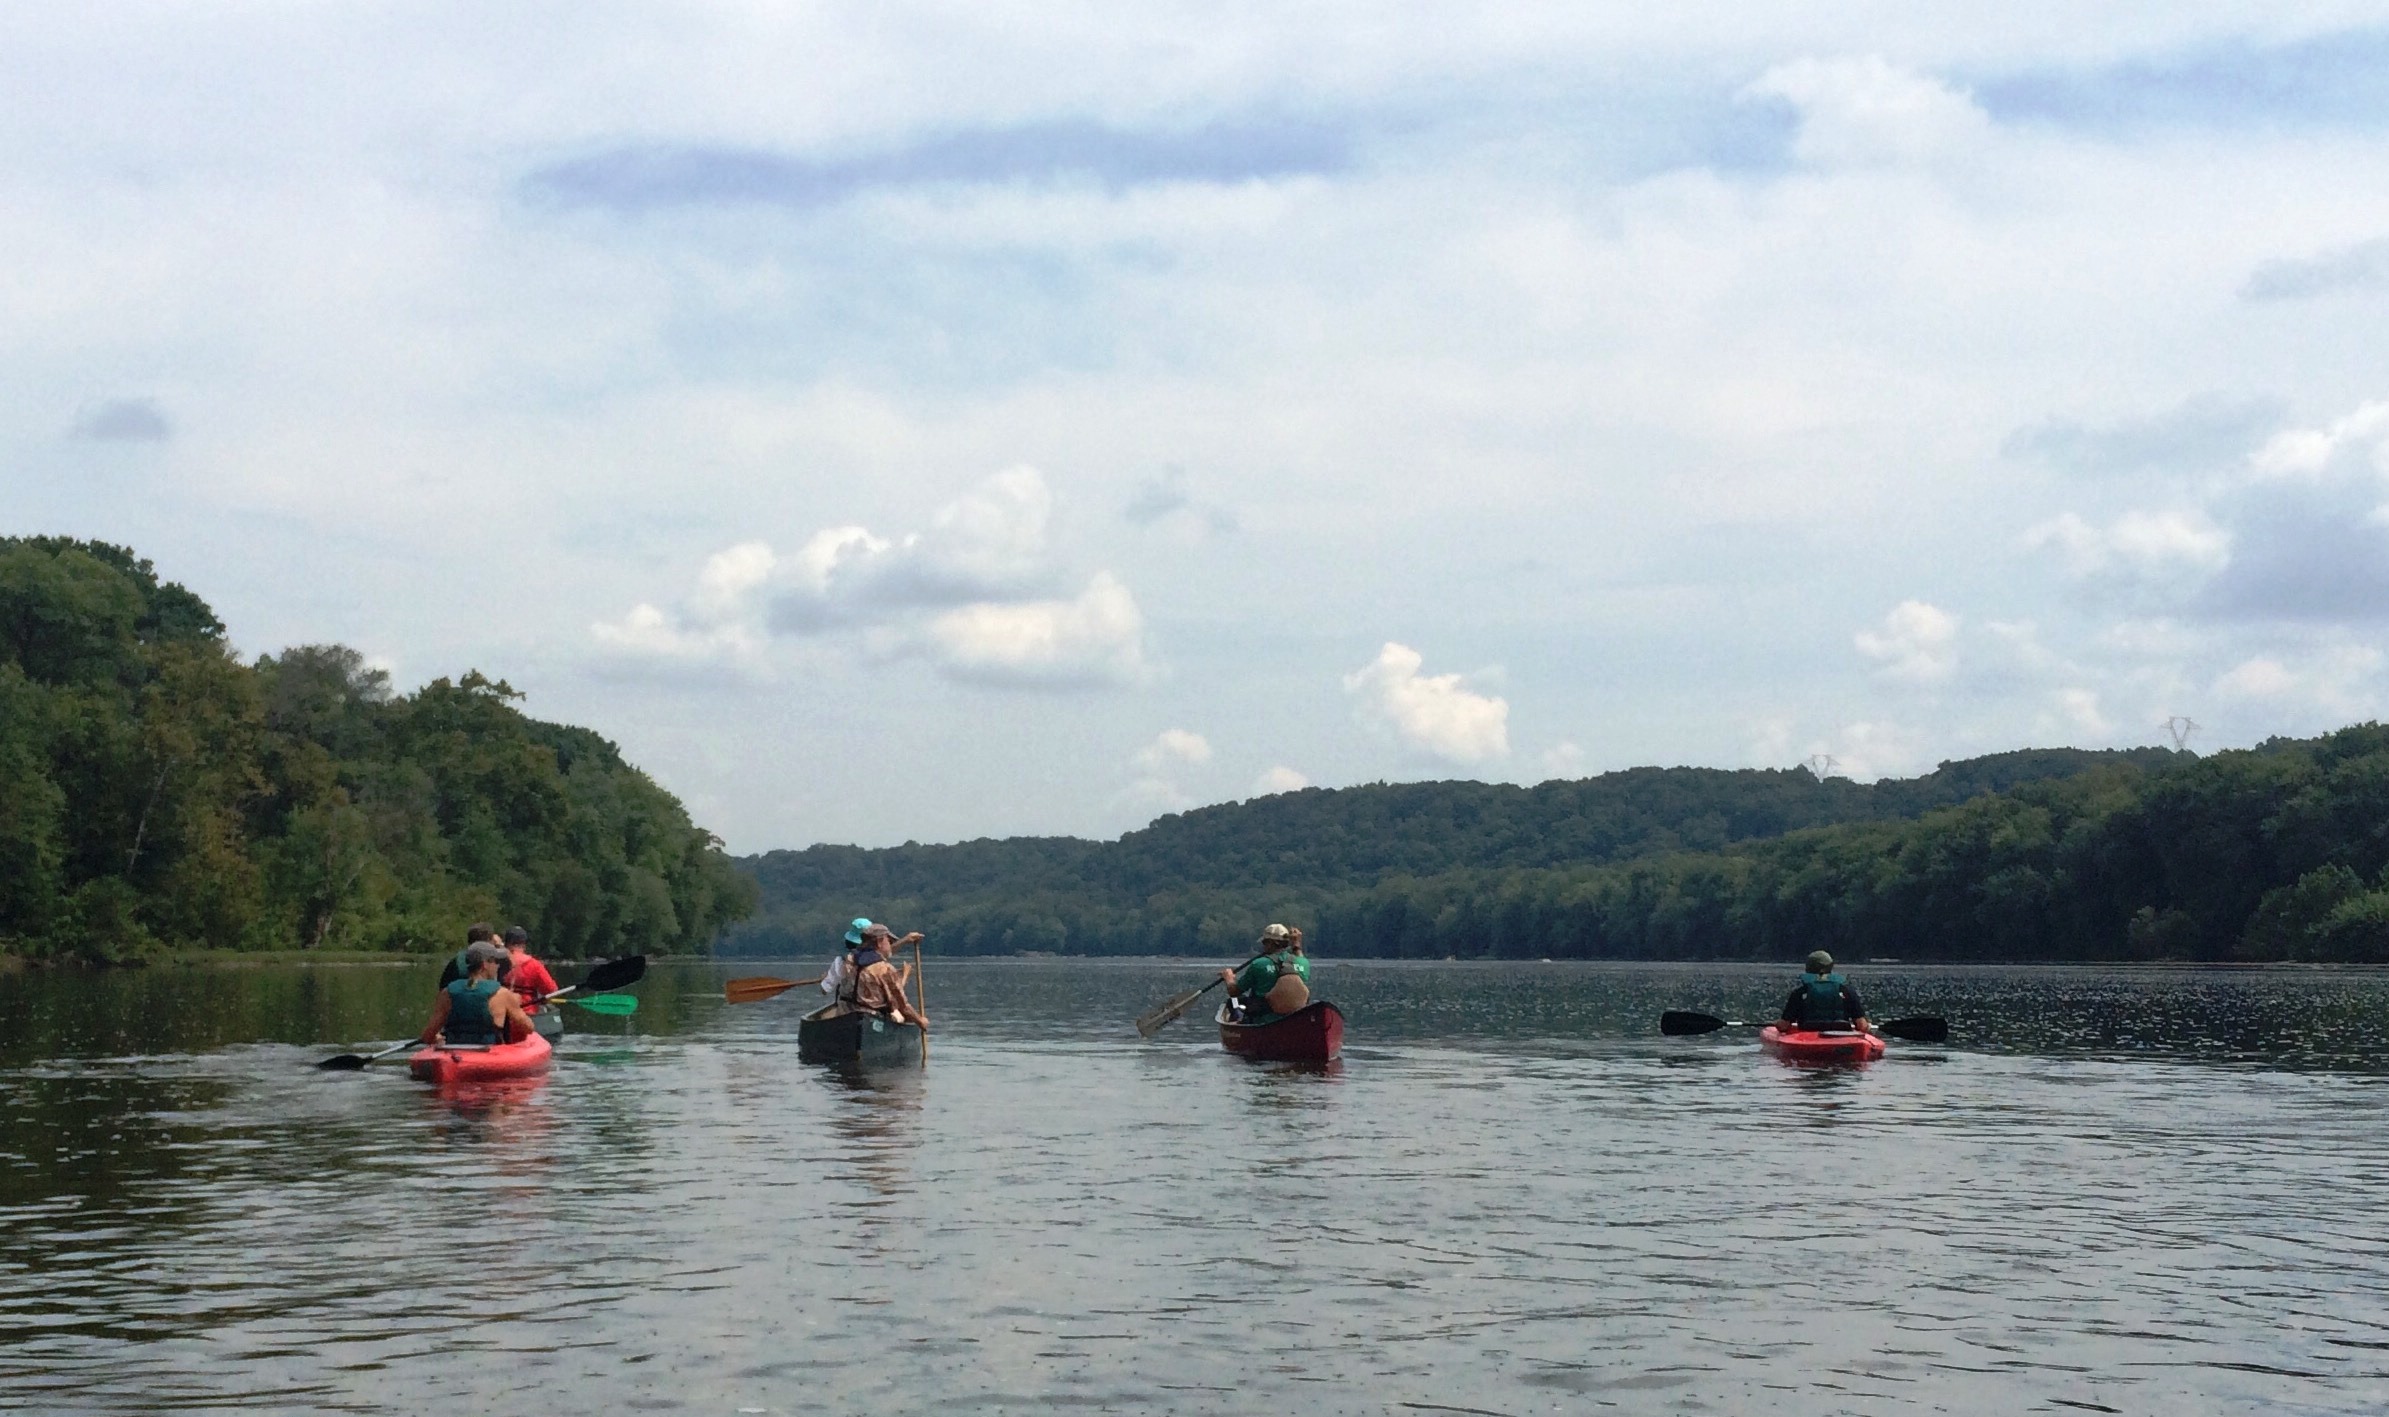 Four kayakers are seen from behind as they paddle down the Potomac River near Brunswick, Md.